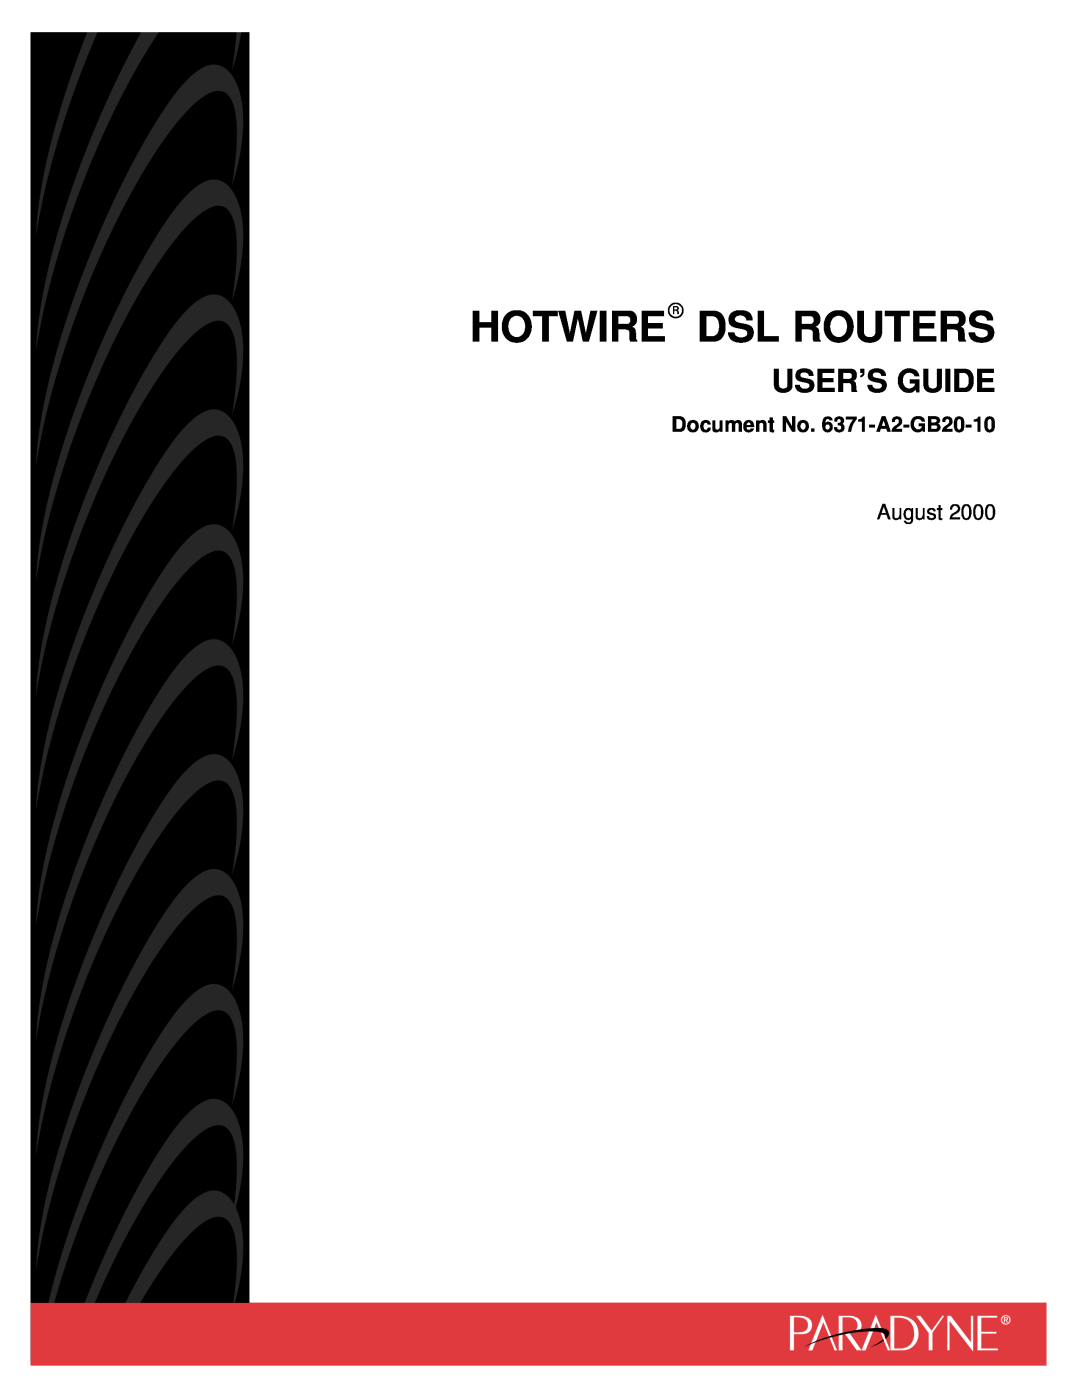 Paradyne manual Hotwire Dsl Routers, Users Guide, Document No. 6371-A2-GB20-10, August 